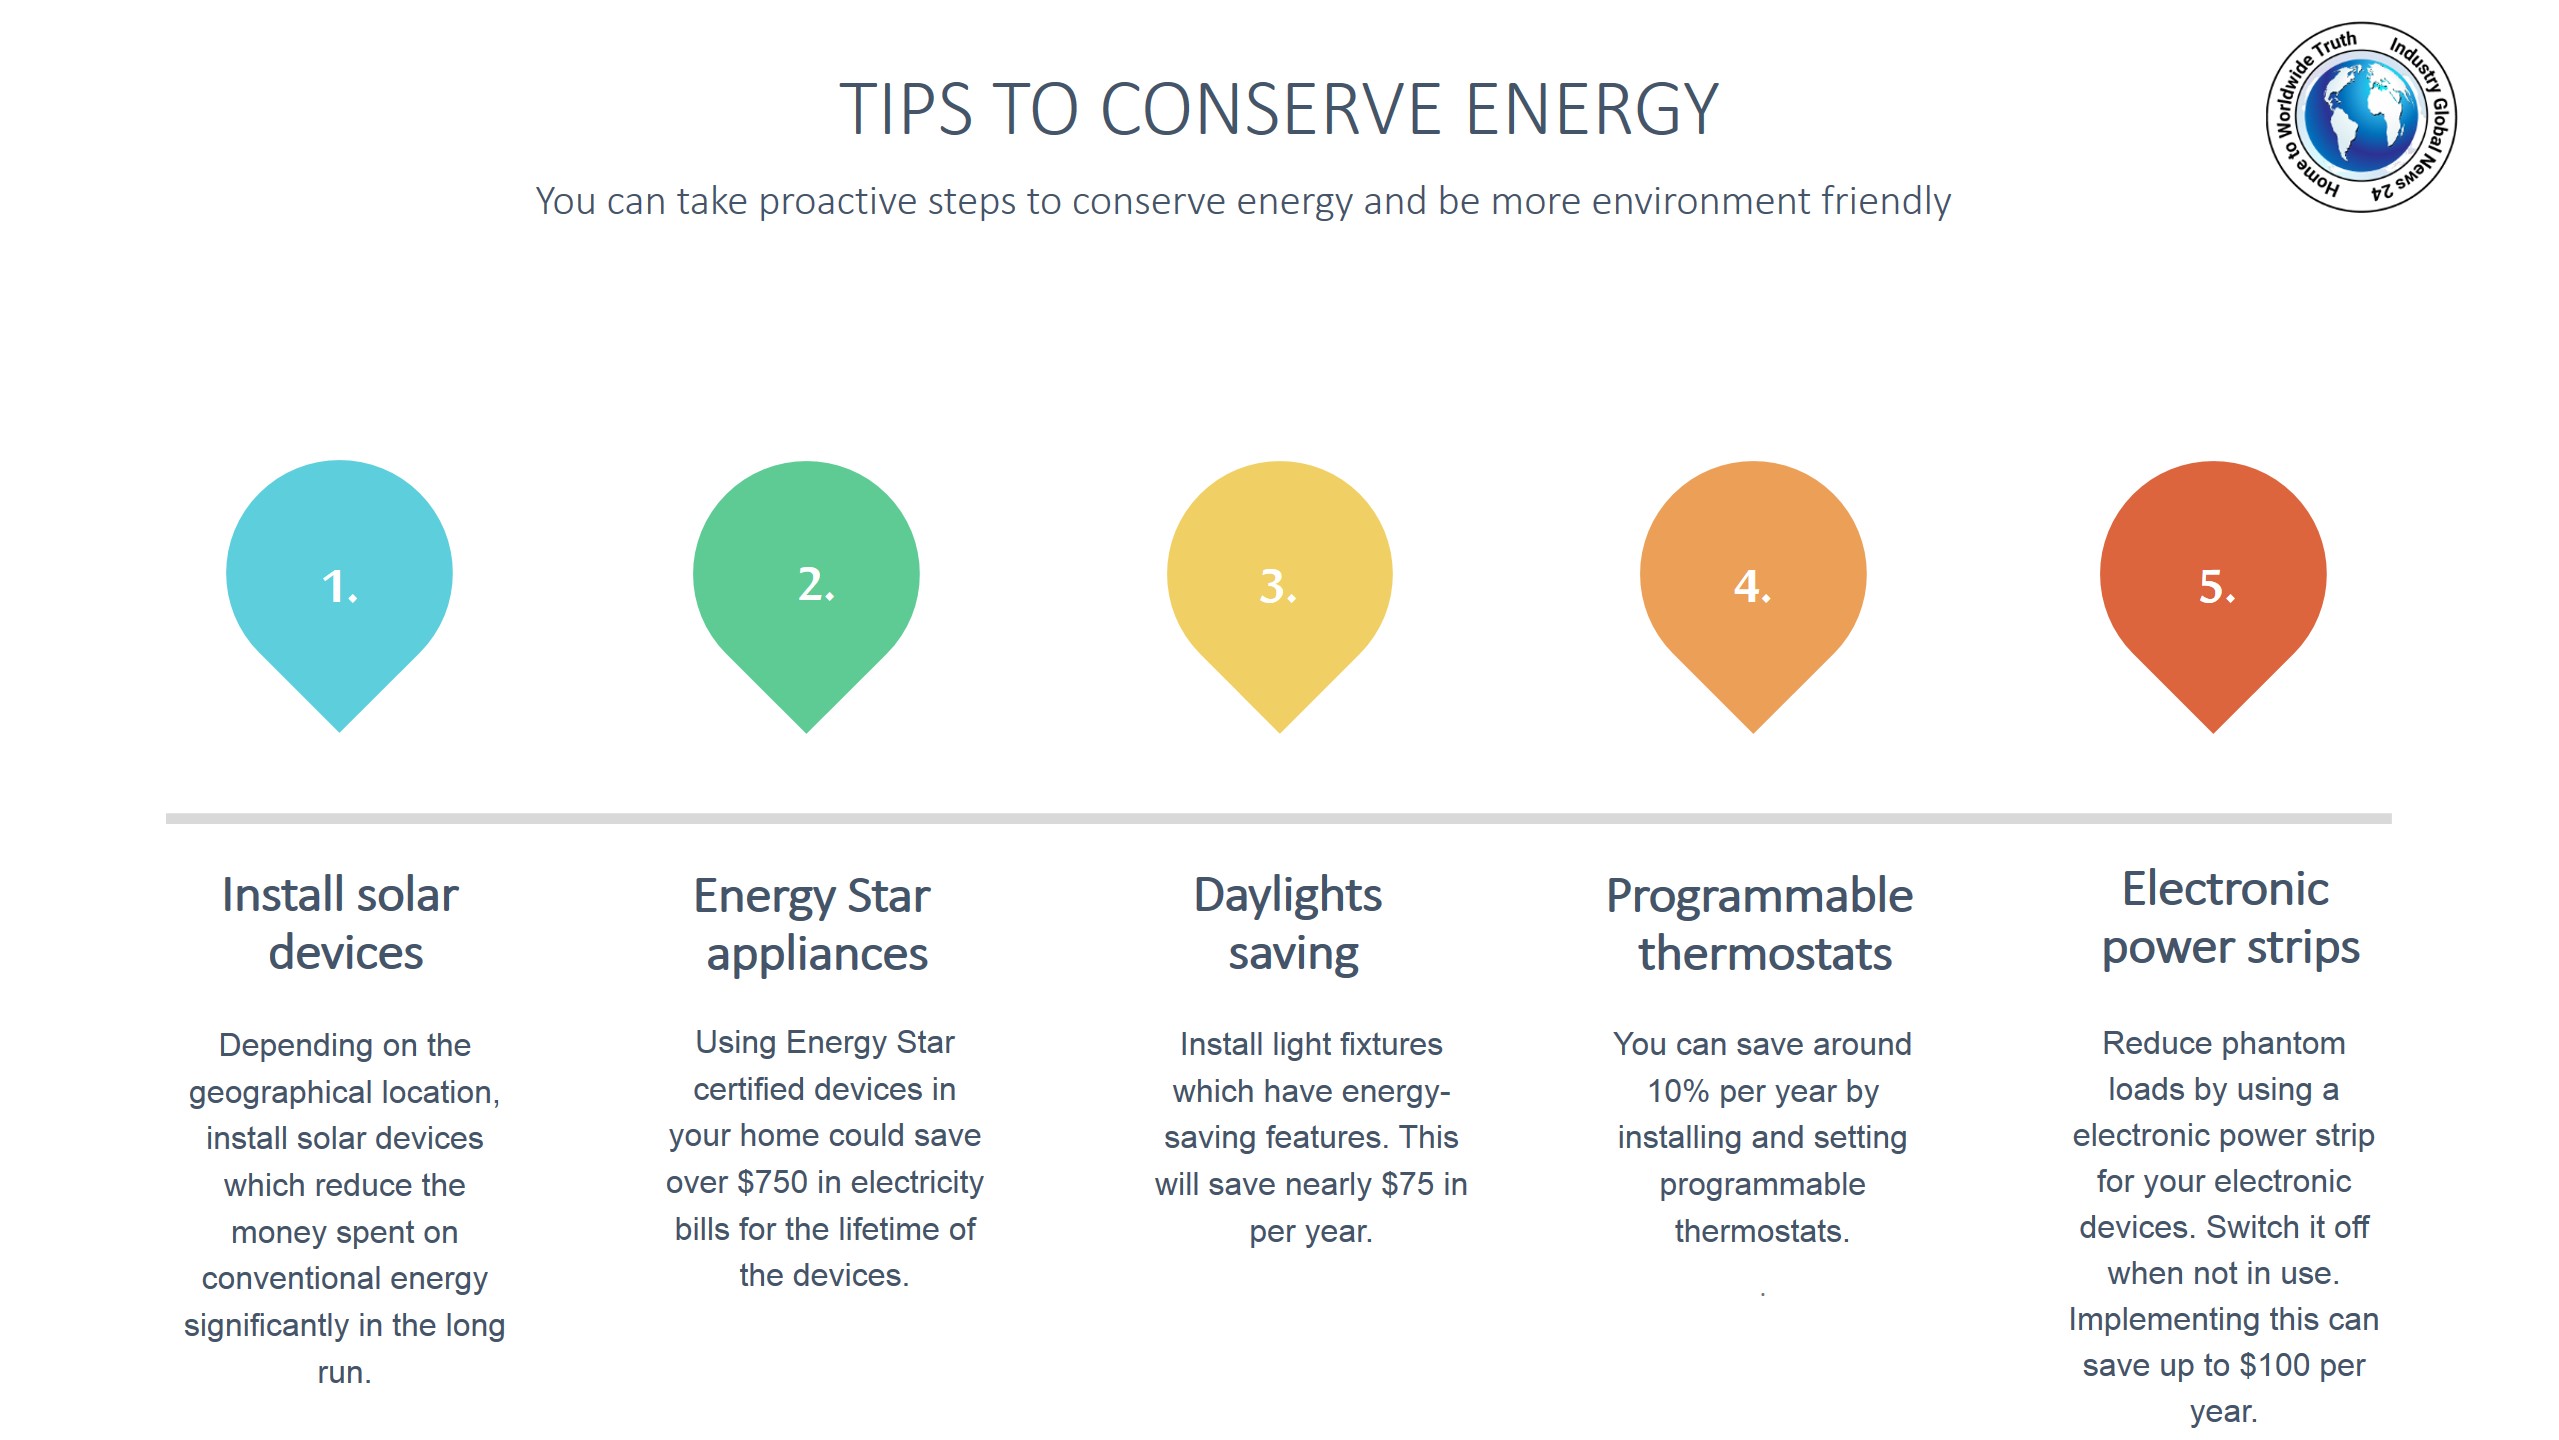 Tips to conserve energy